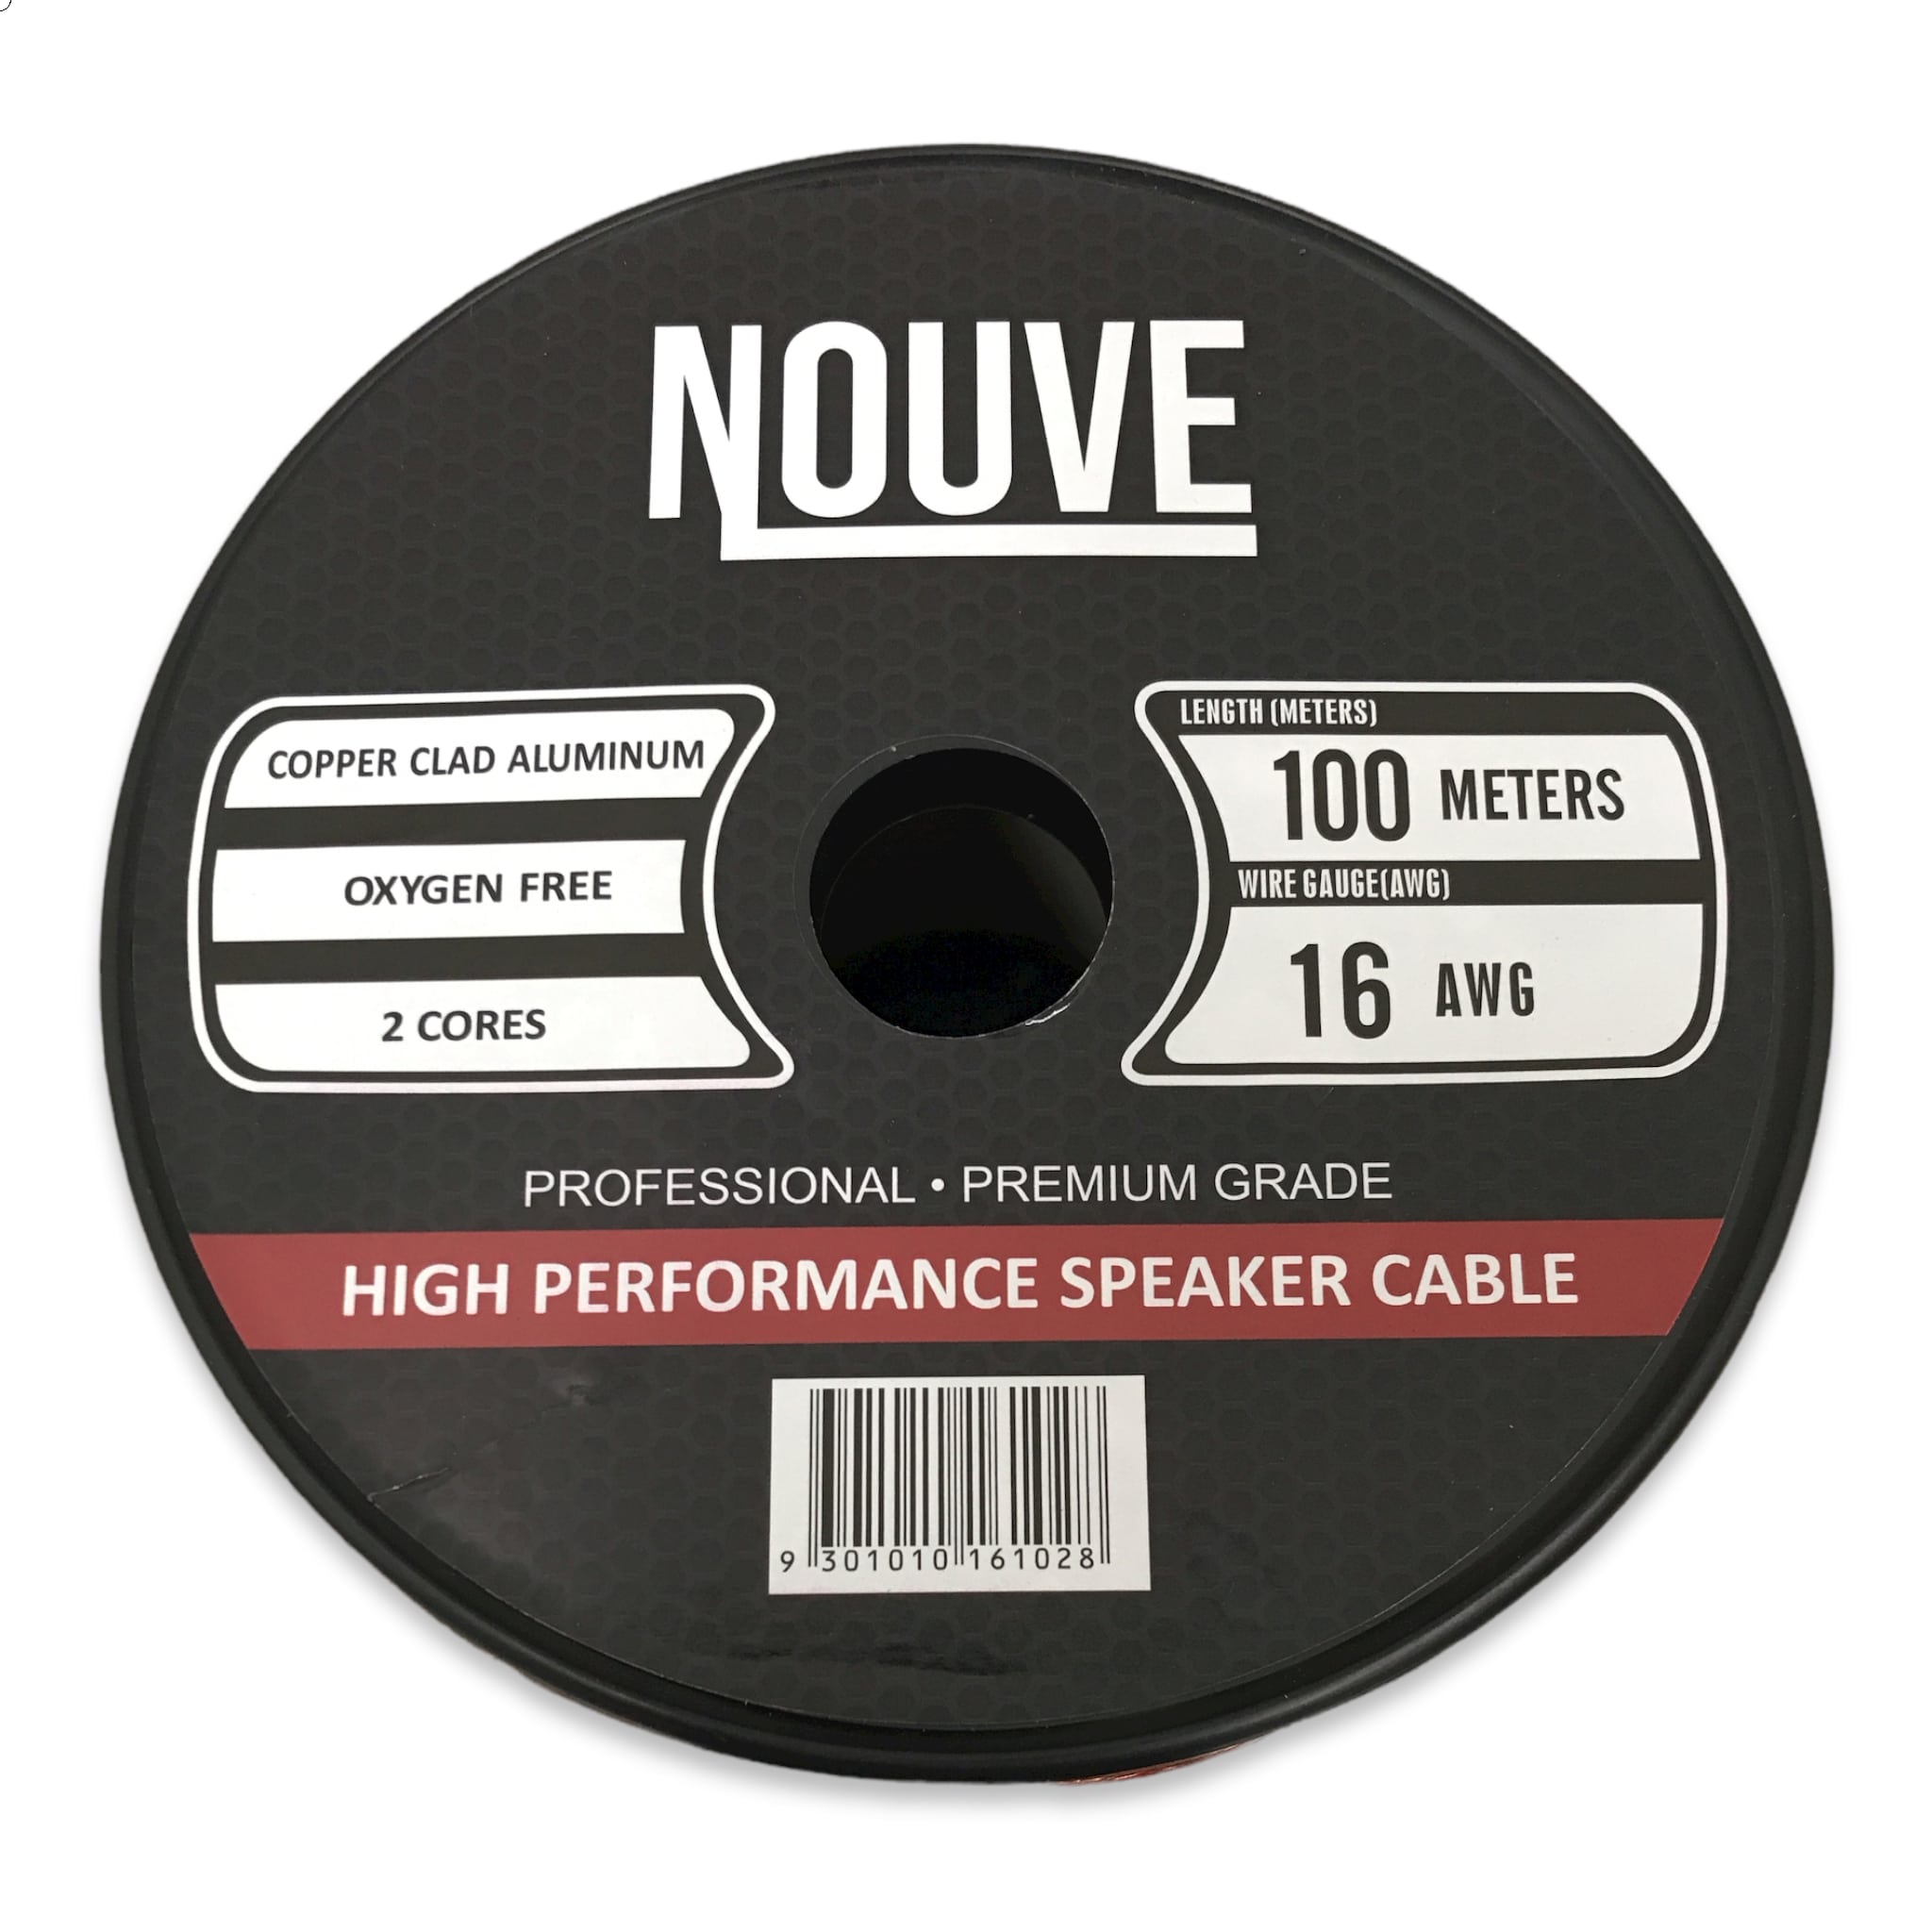 16 awg speaker cable 100m cca nouve cover